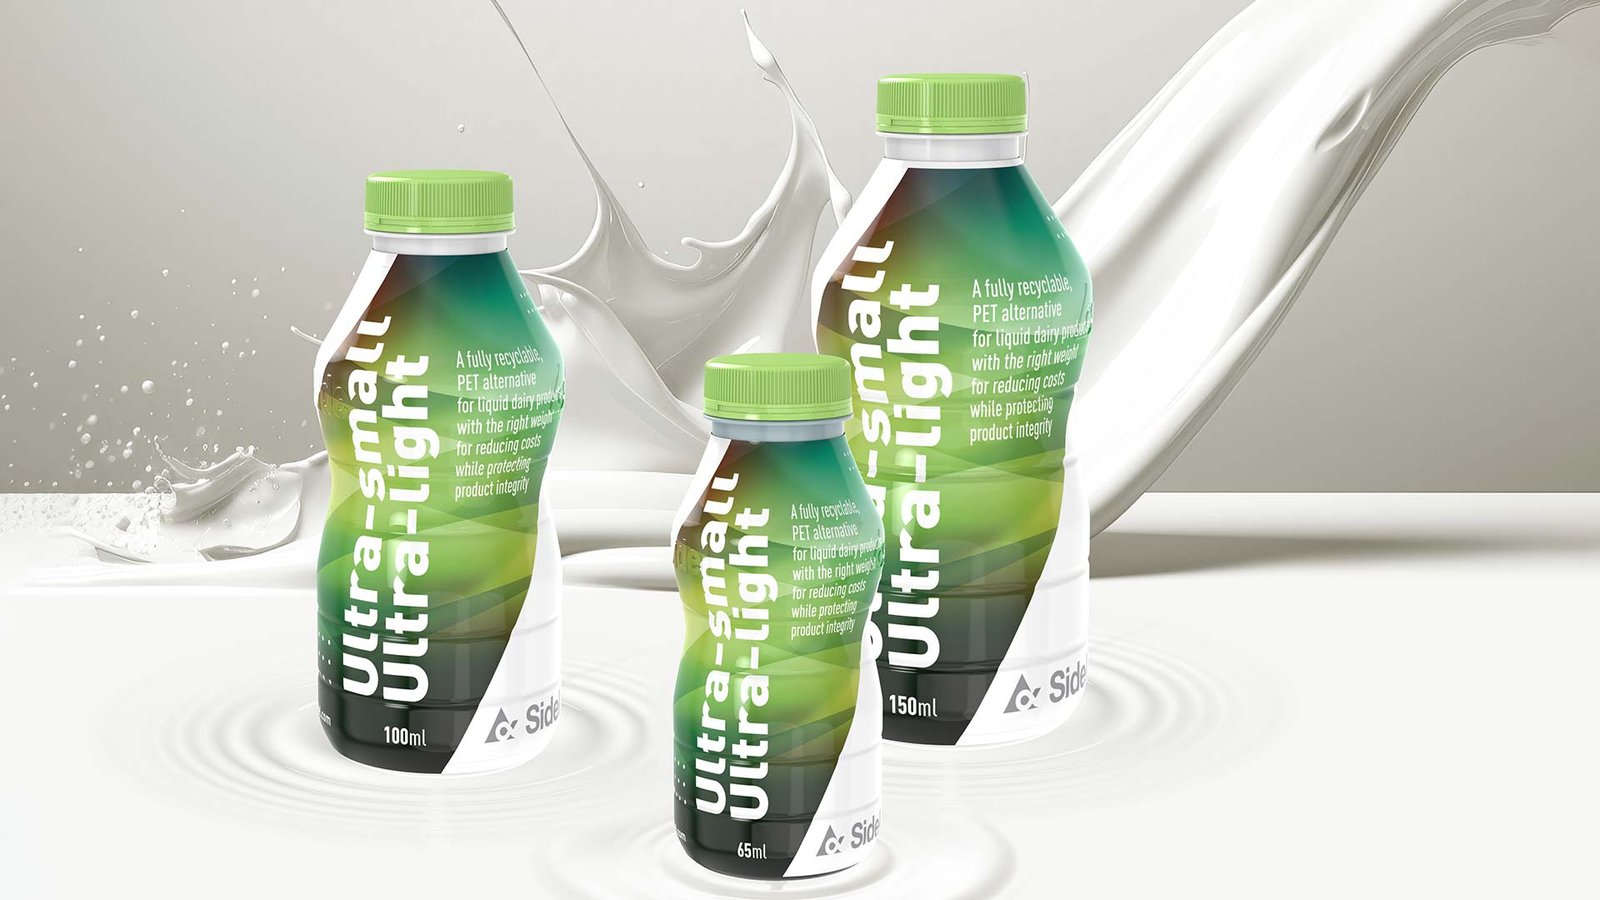 Sidel launches ultra-small and light PET bottles for liquid dairy products